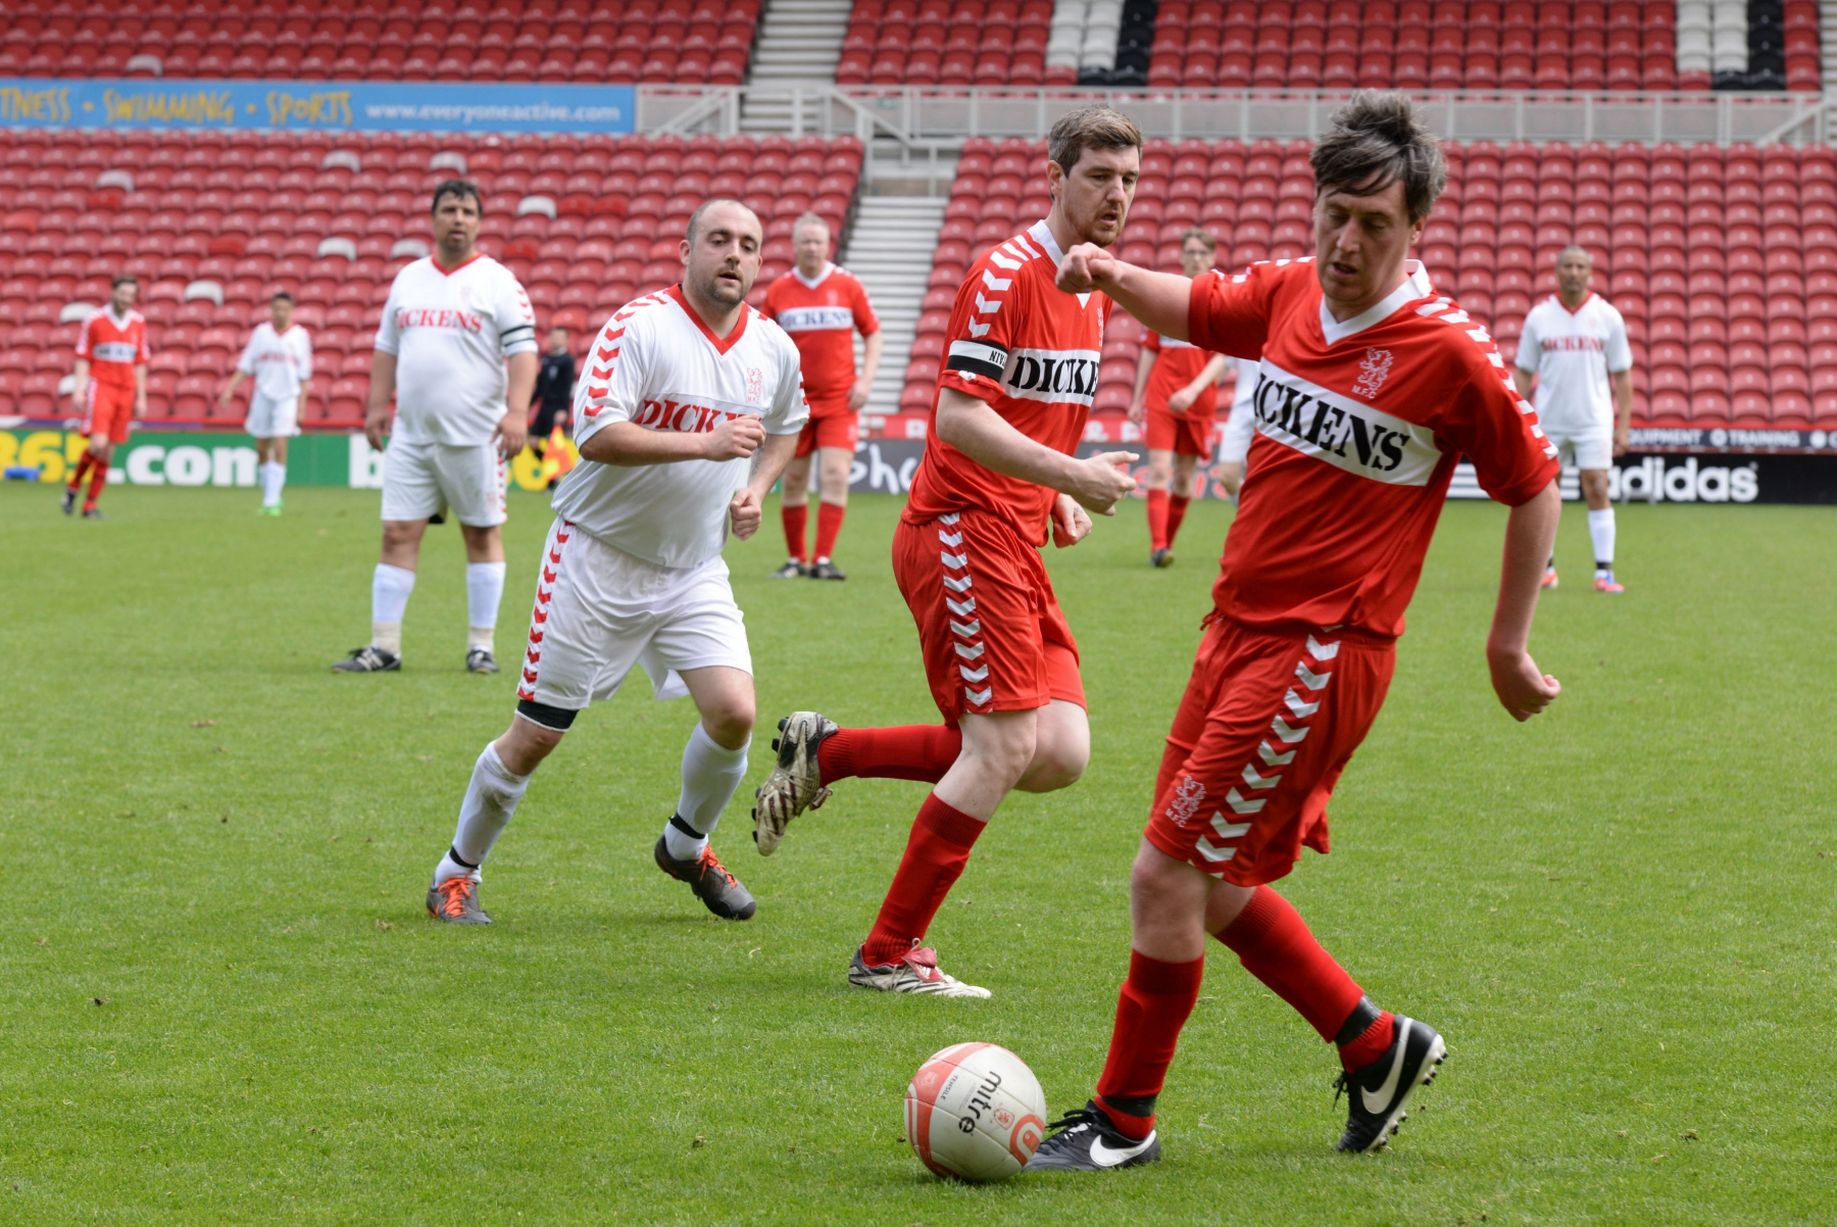 Pictures: Charity football match at the Riverside Stadium - Teesside ...